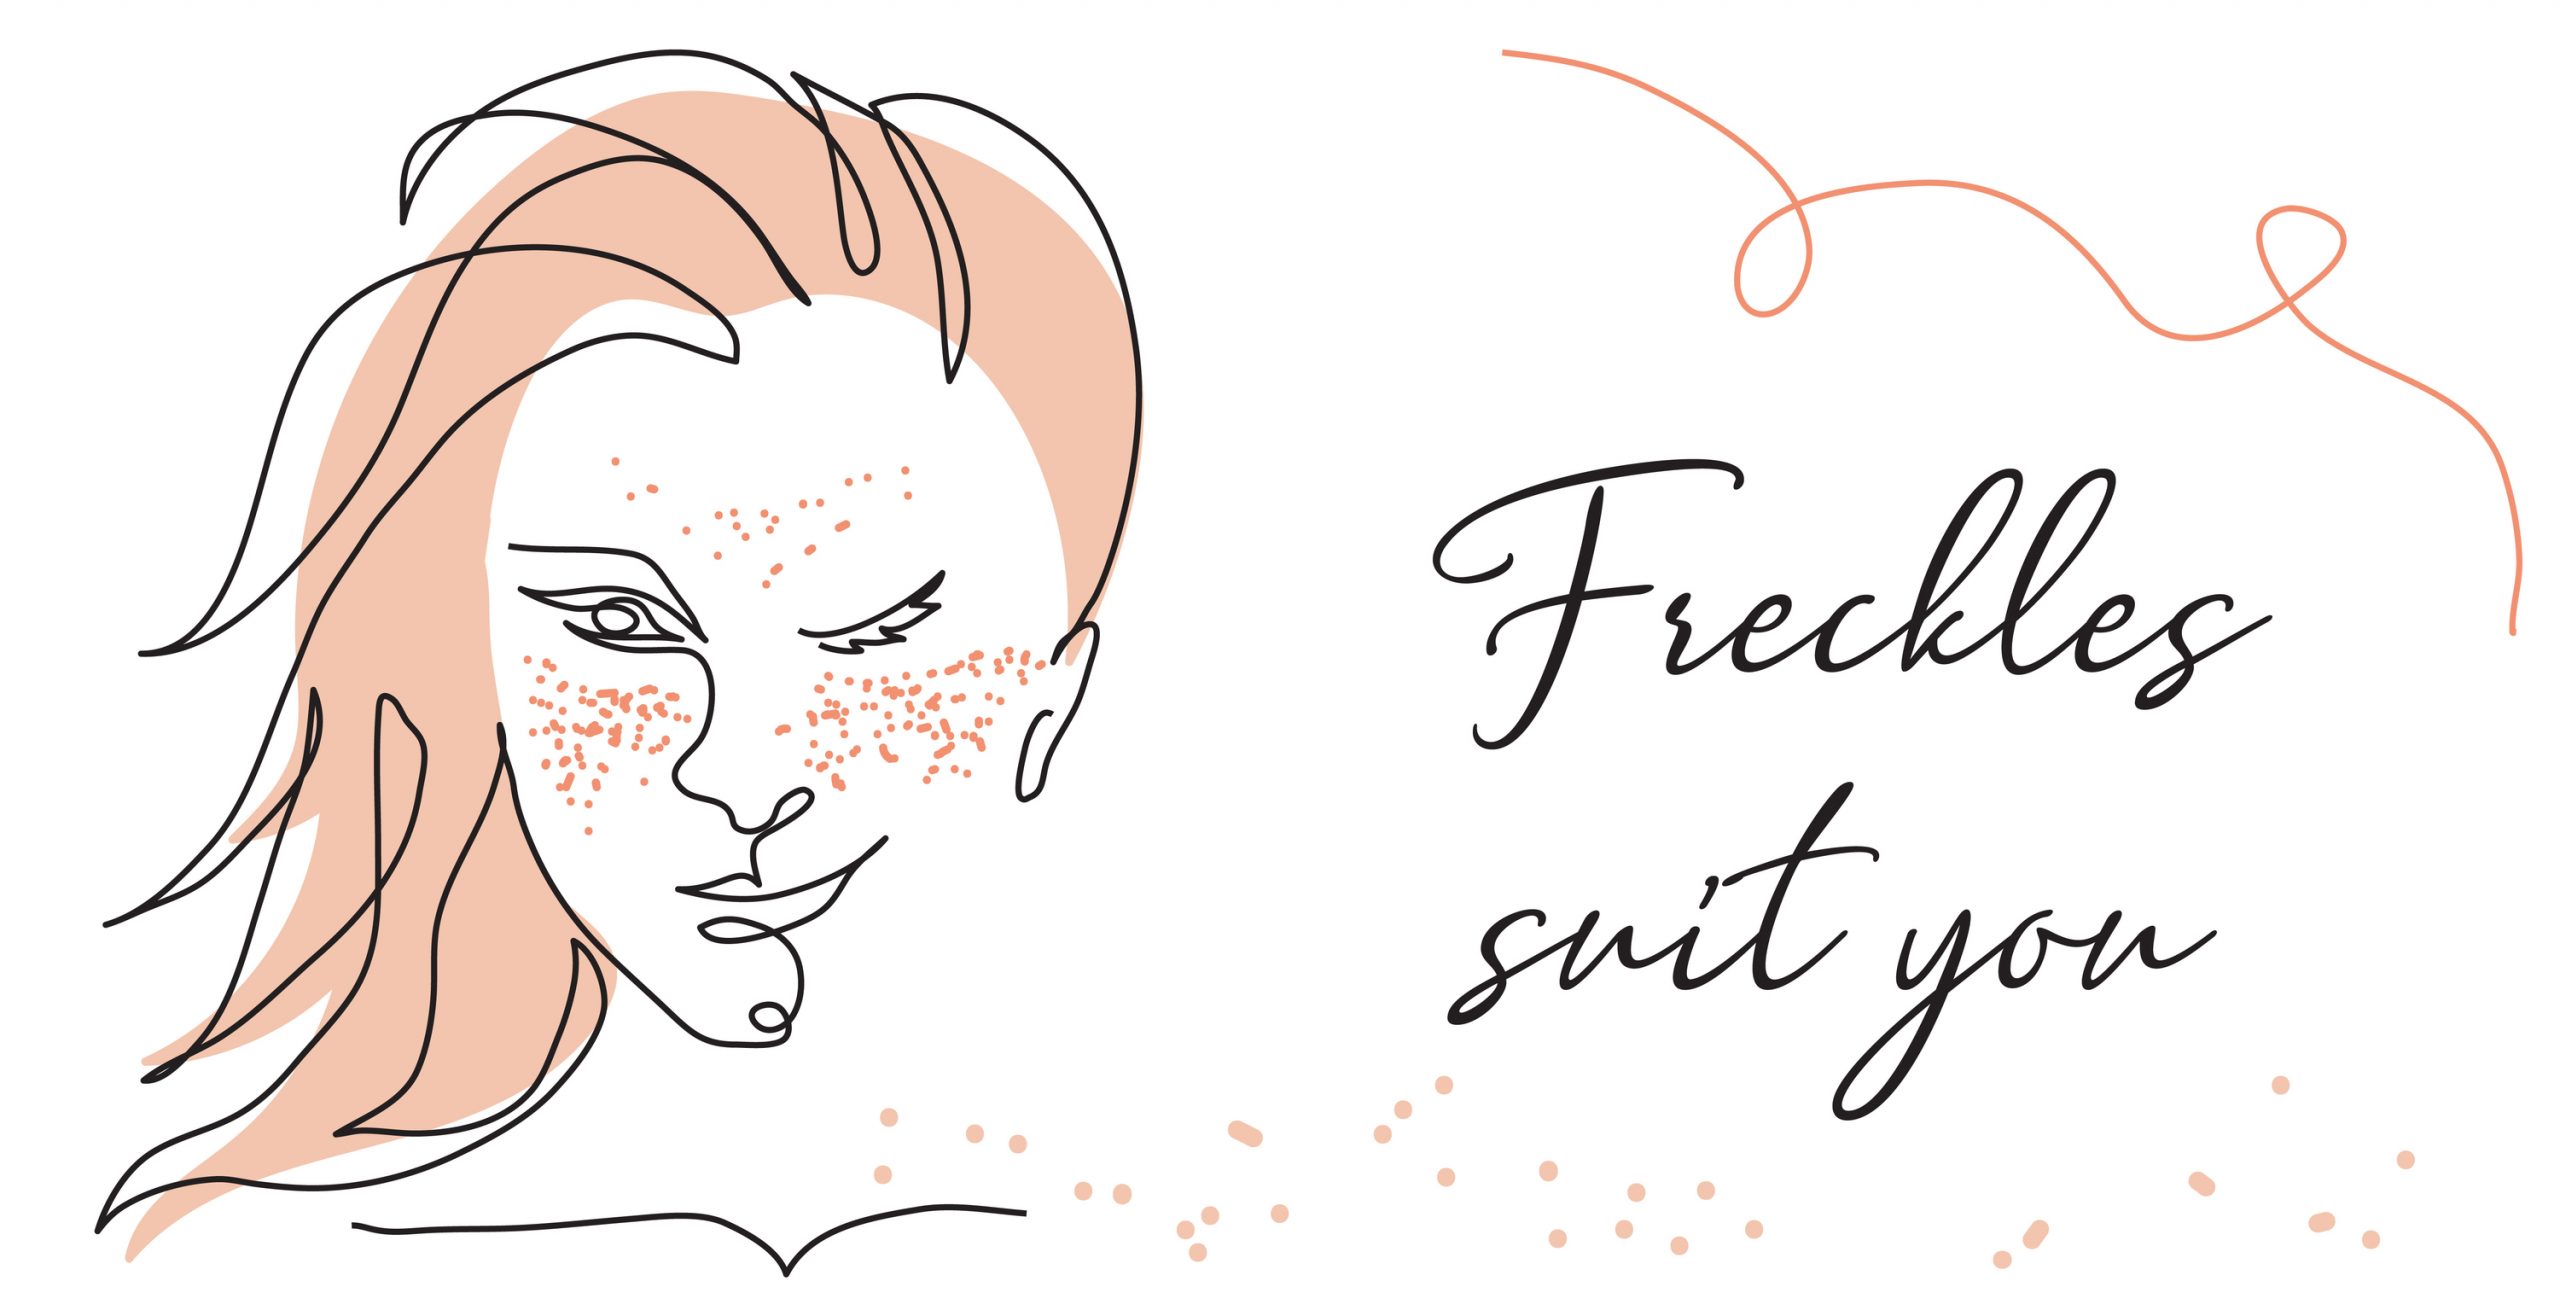 Love Your Freckles Day!